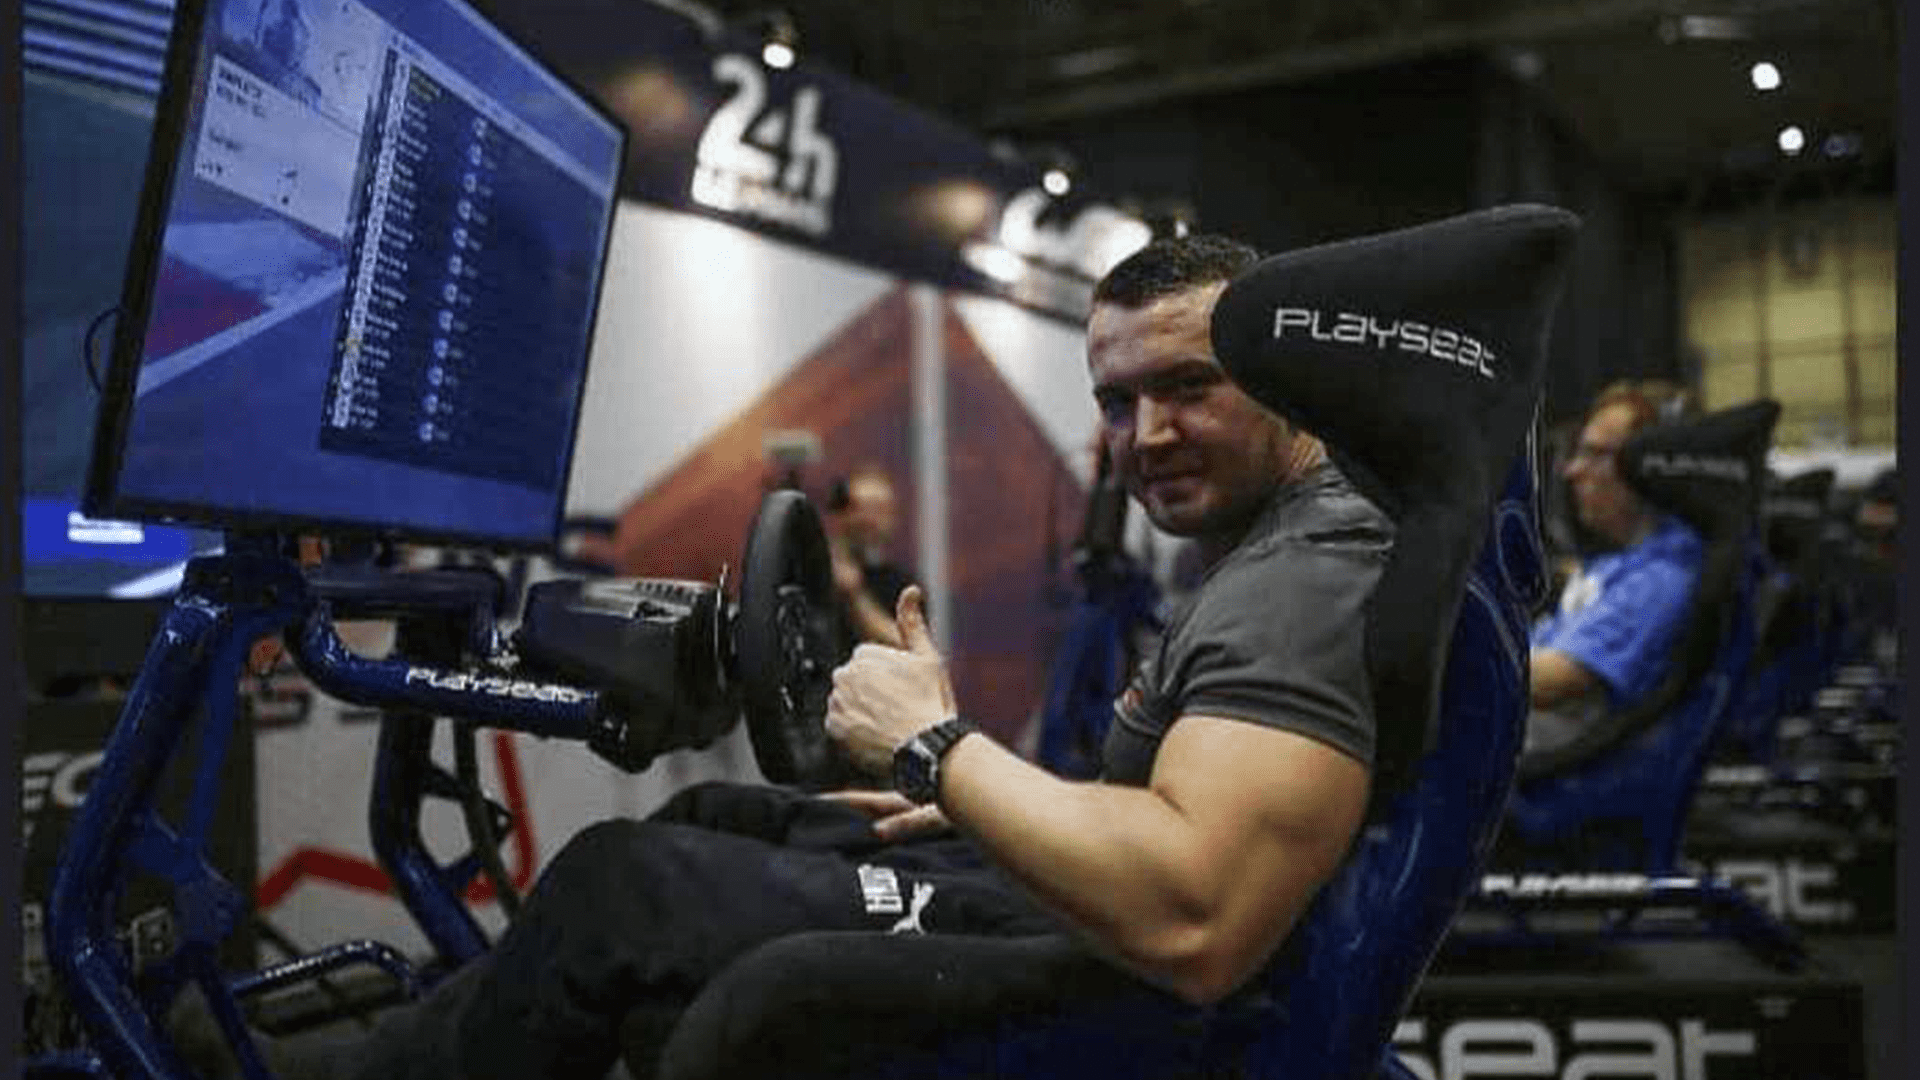 From console to sim rig, Arnold reflects on his journey in esports